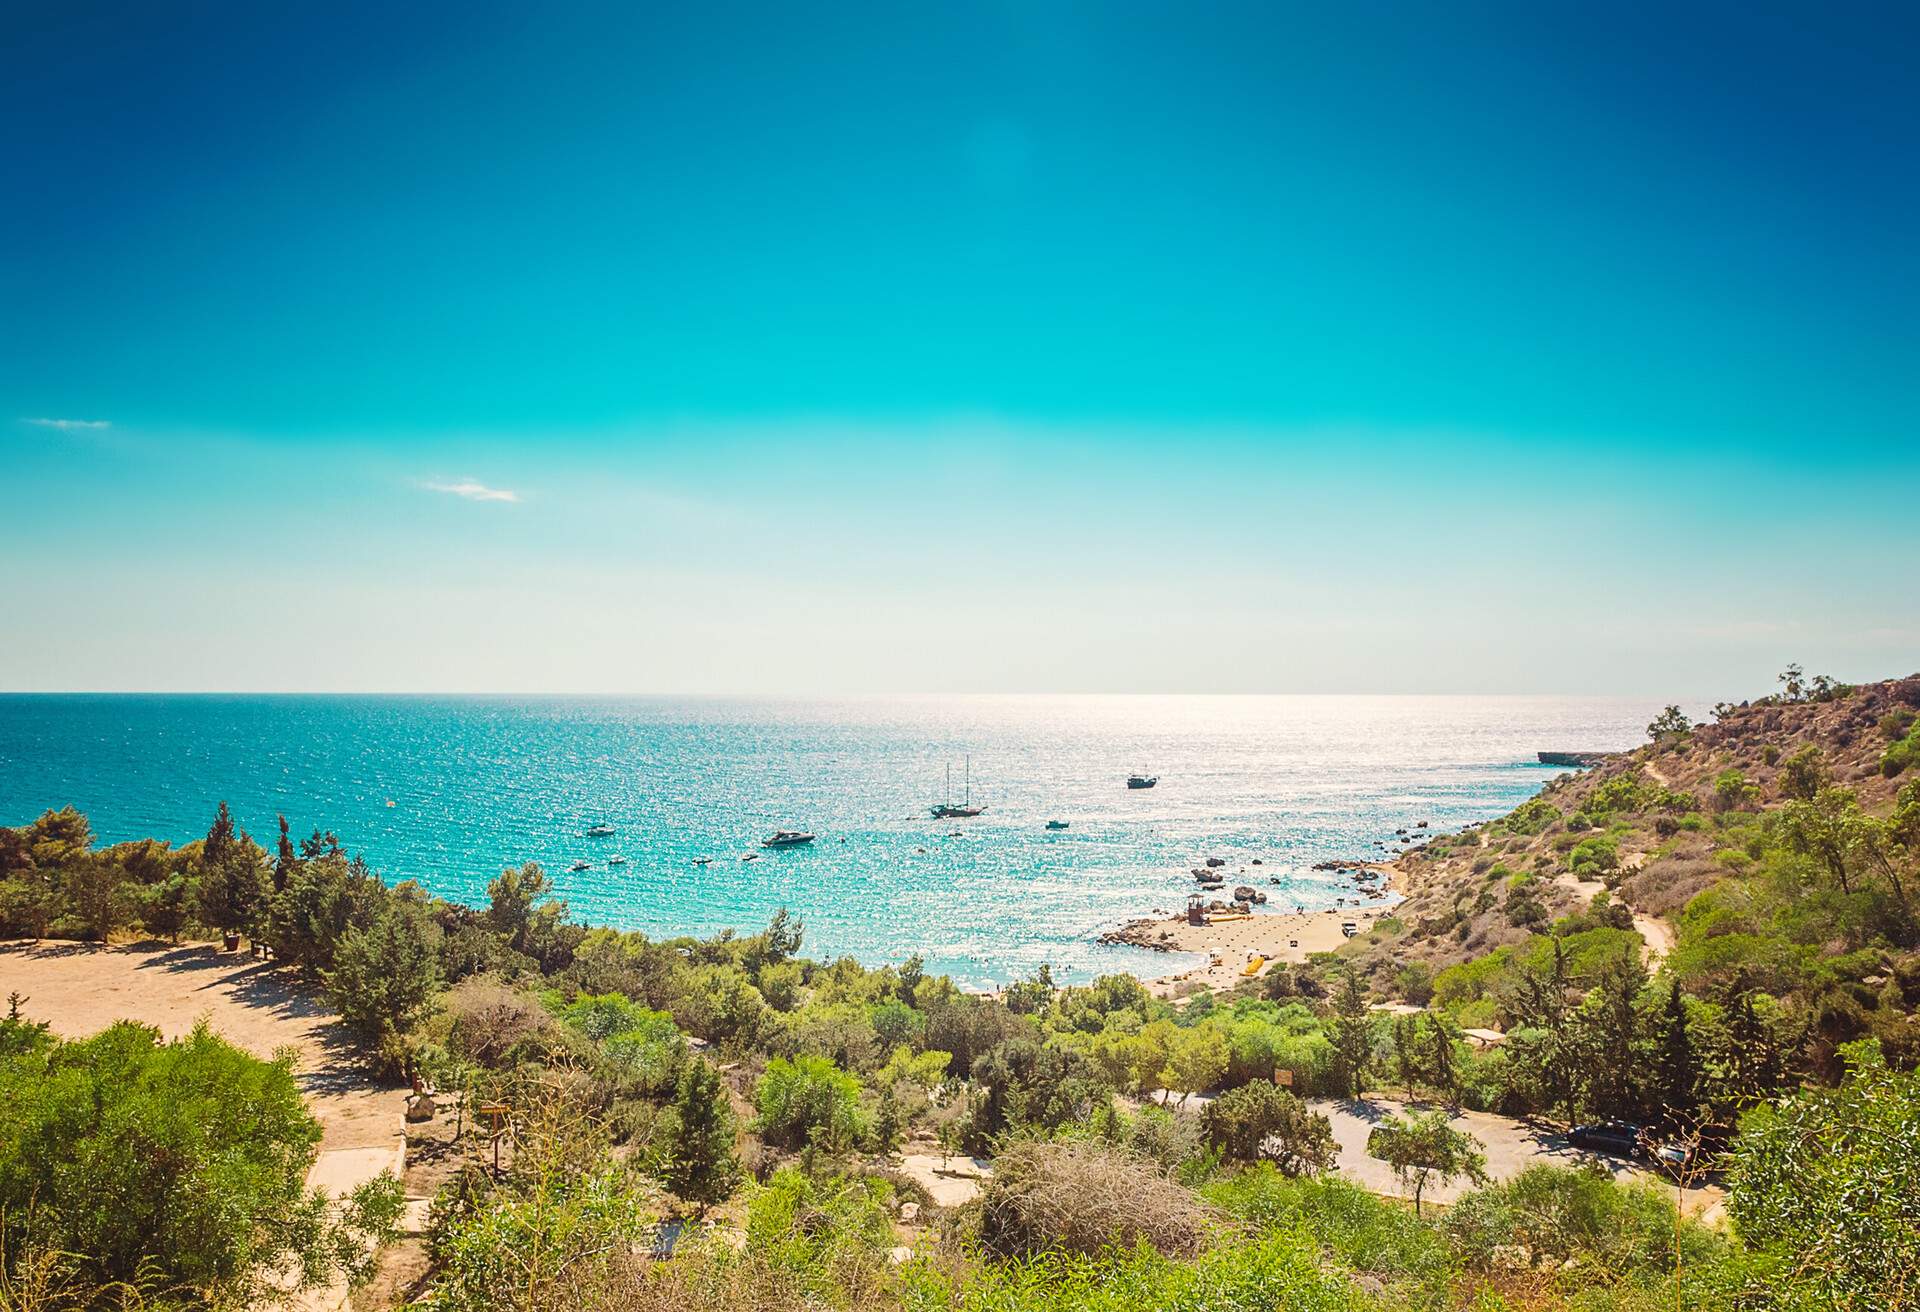 Seascape in Cyprus Protaras, Konnos beach, picturesque view of lagoon Mediterranean Sea from above